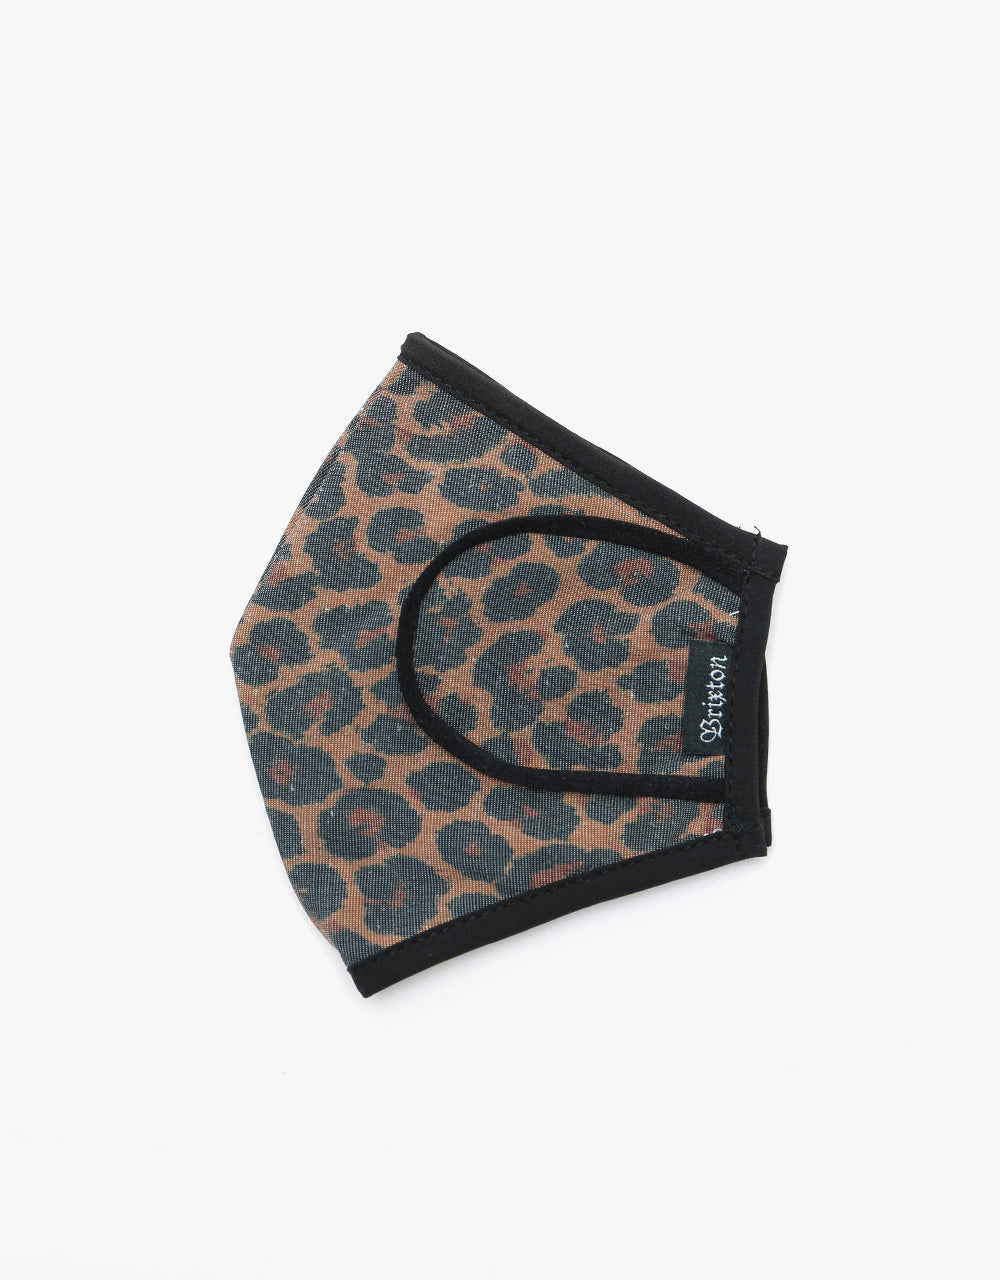 Brixton Antimicrobial Face Mask - Leopard